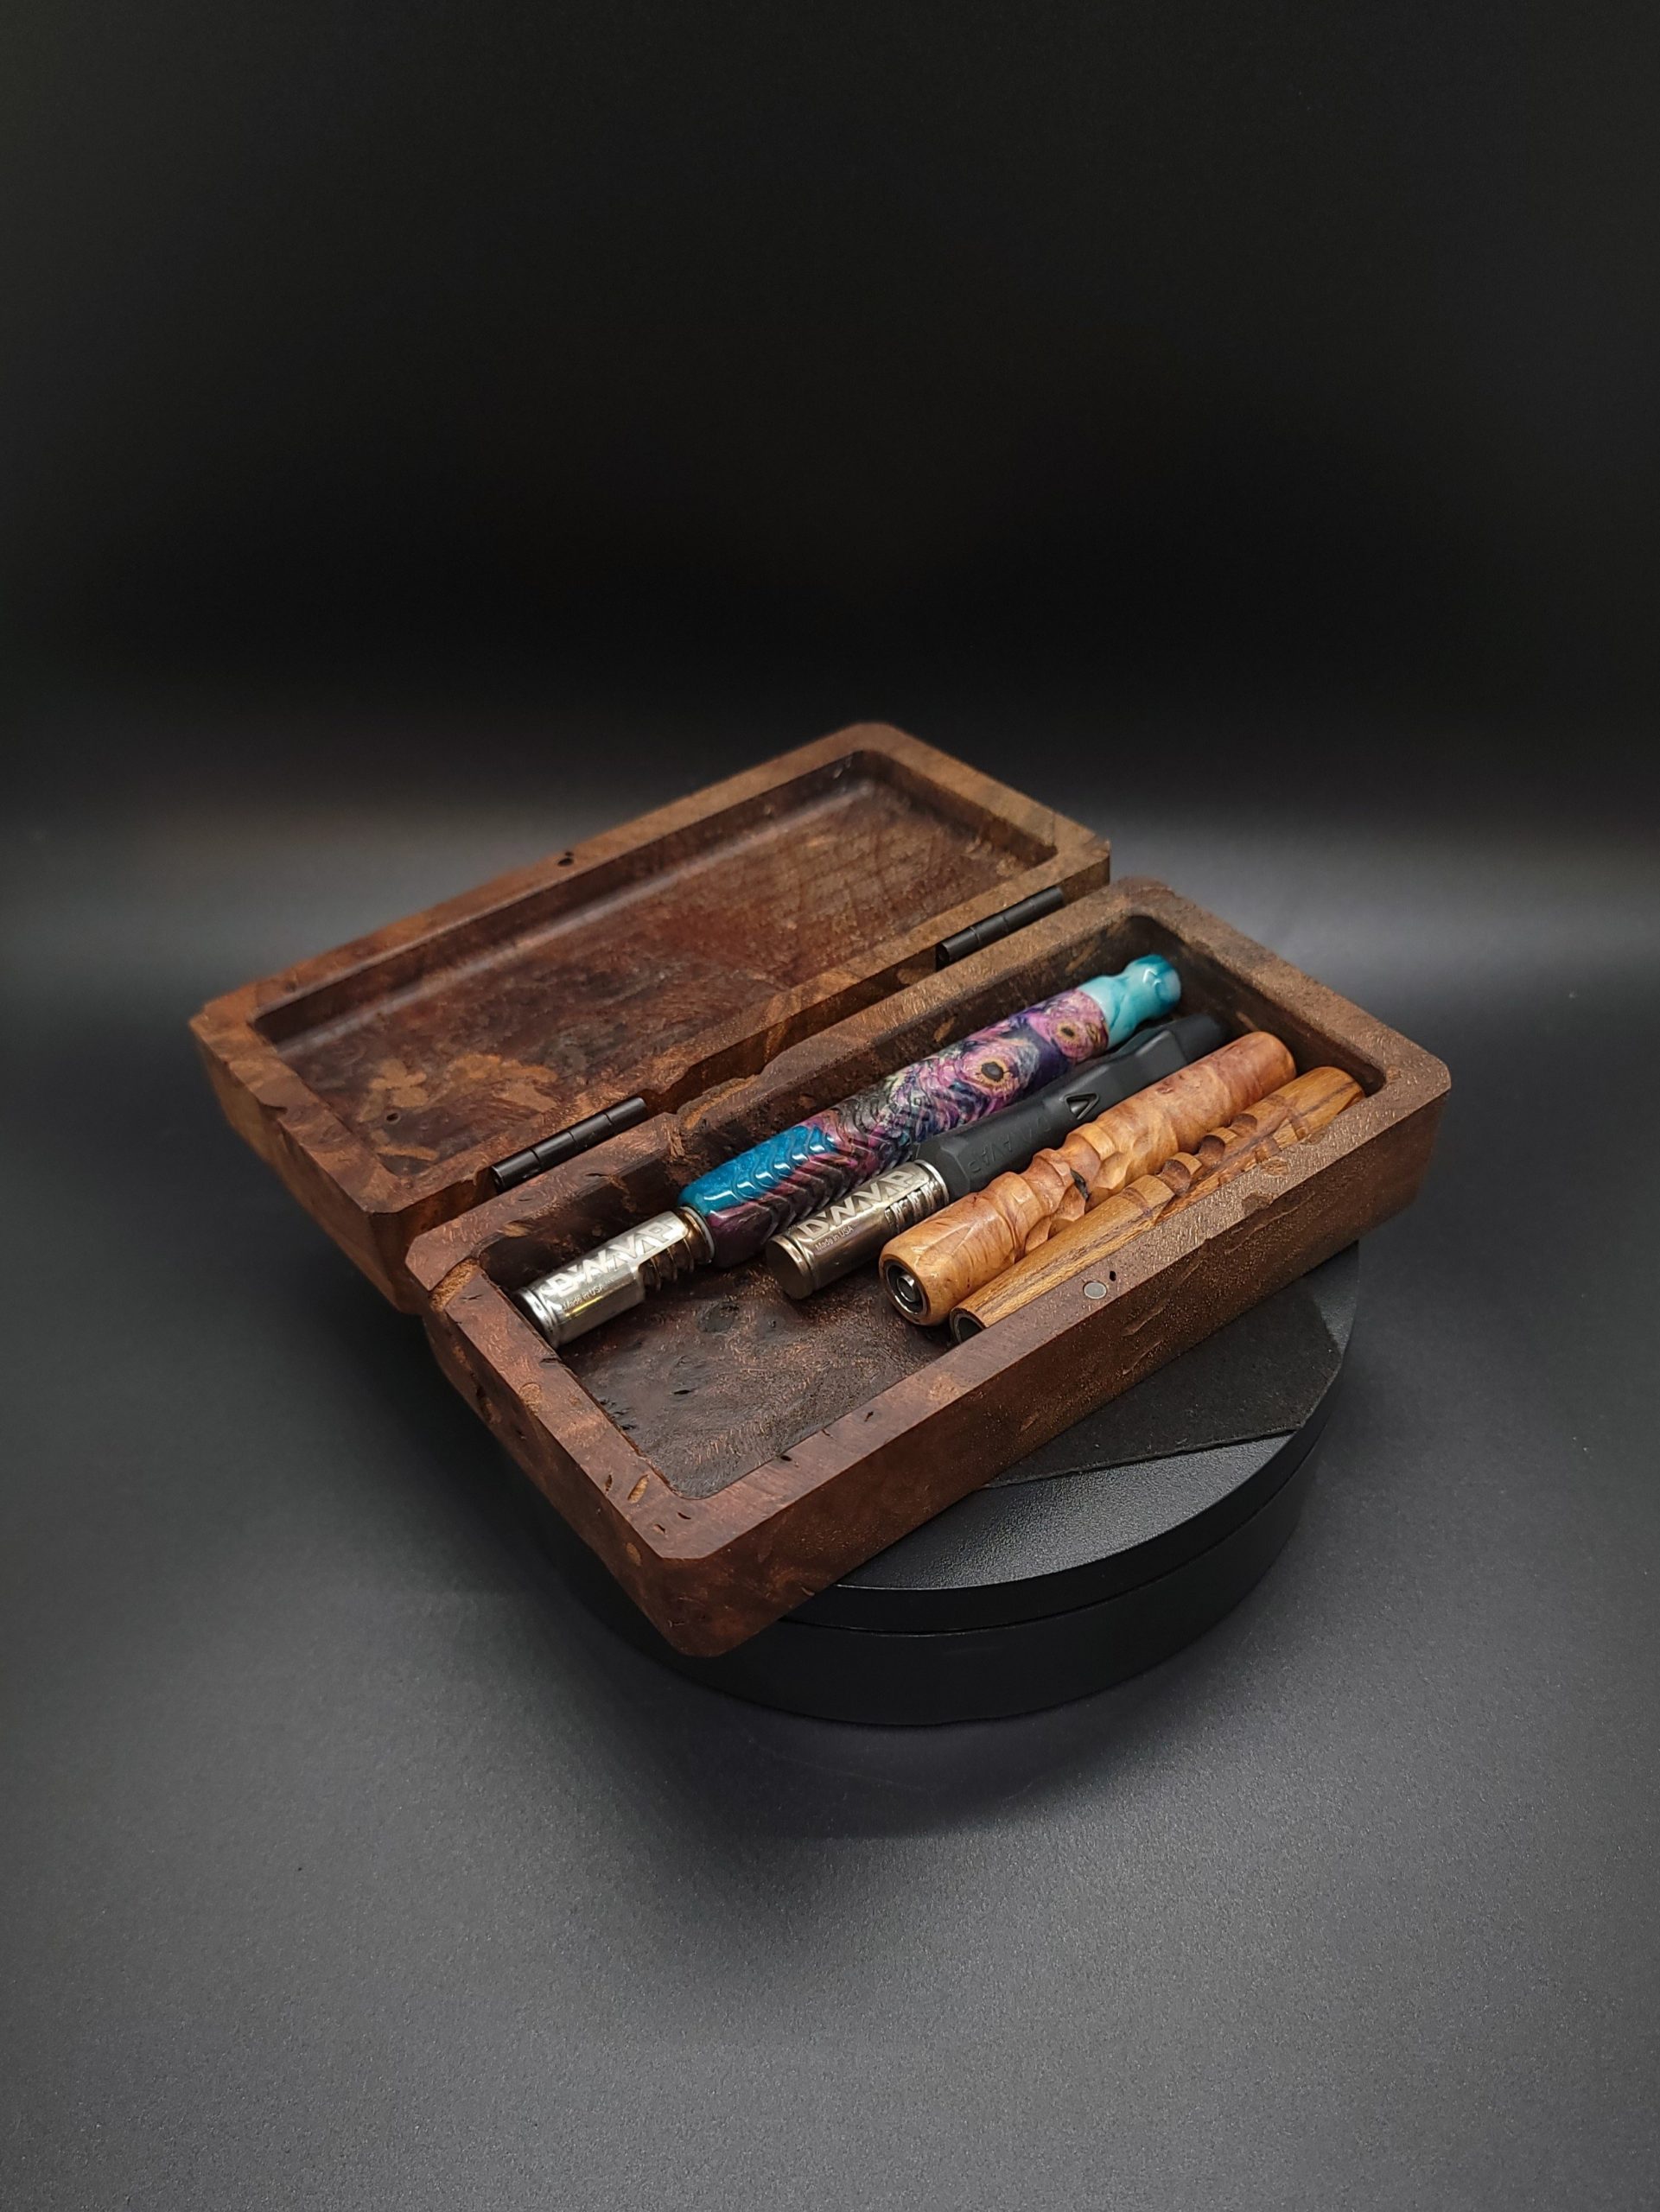 This image portrays Vintage Style Claro Walnut Burl Stash Box by Dovetail Woodwork.